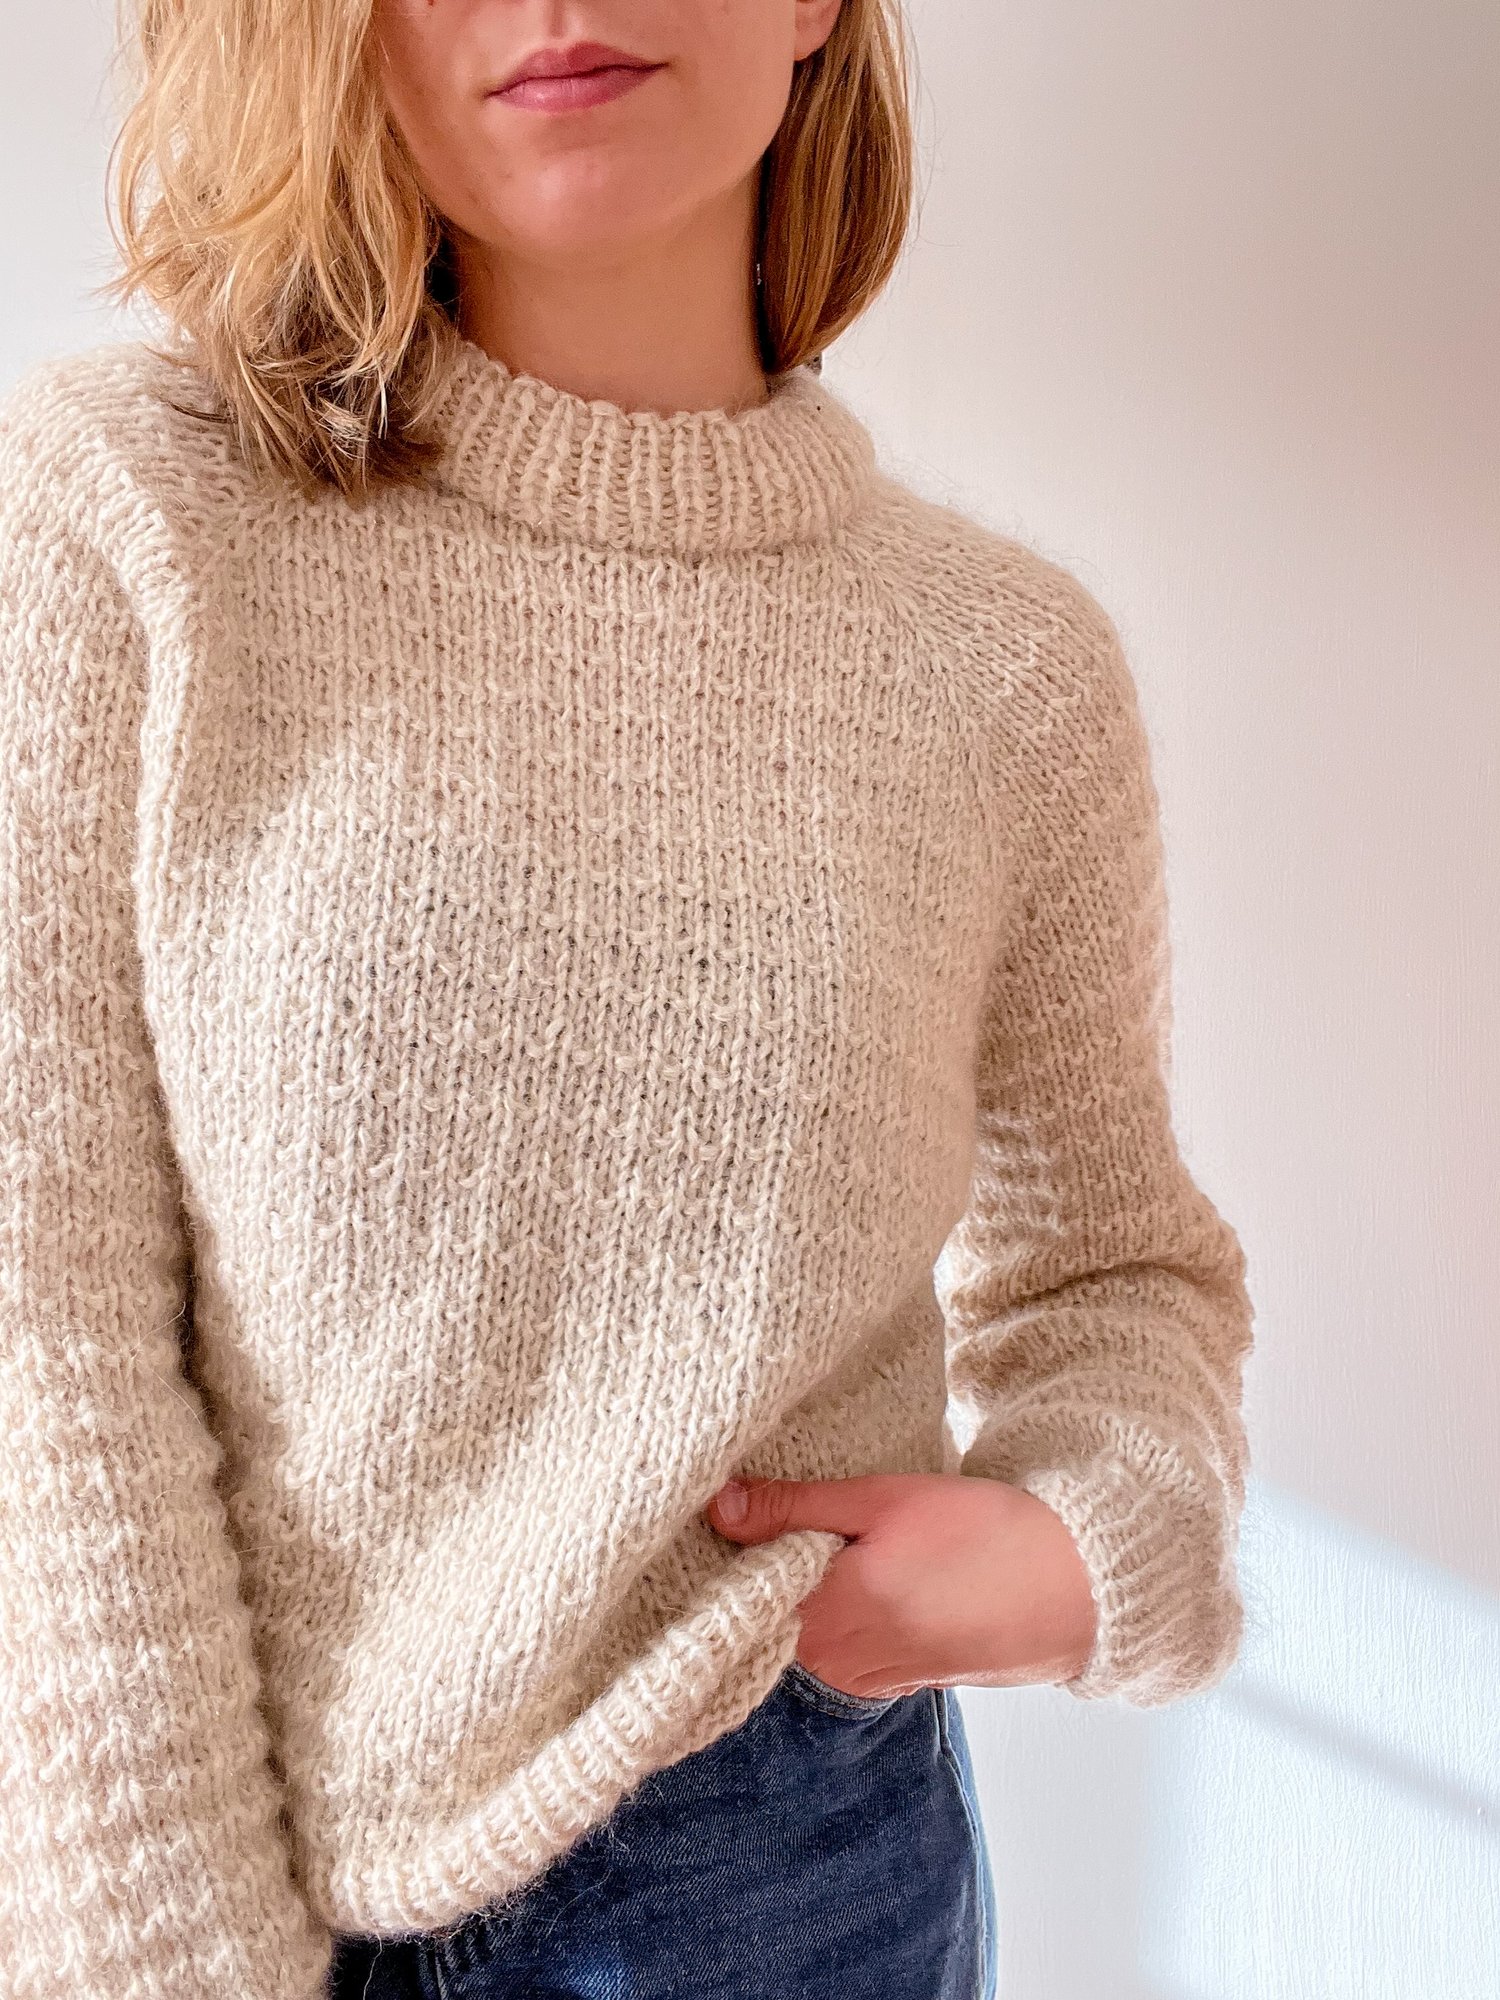 Aosta Sweater (3.0) — The Knit Purl Girl